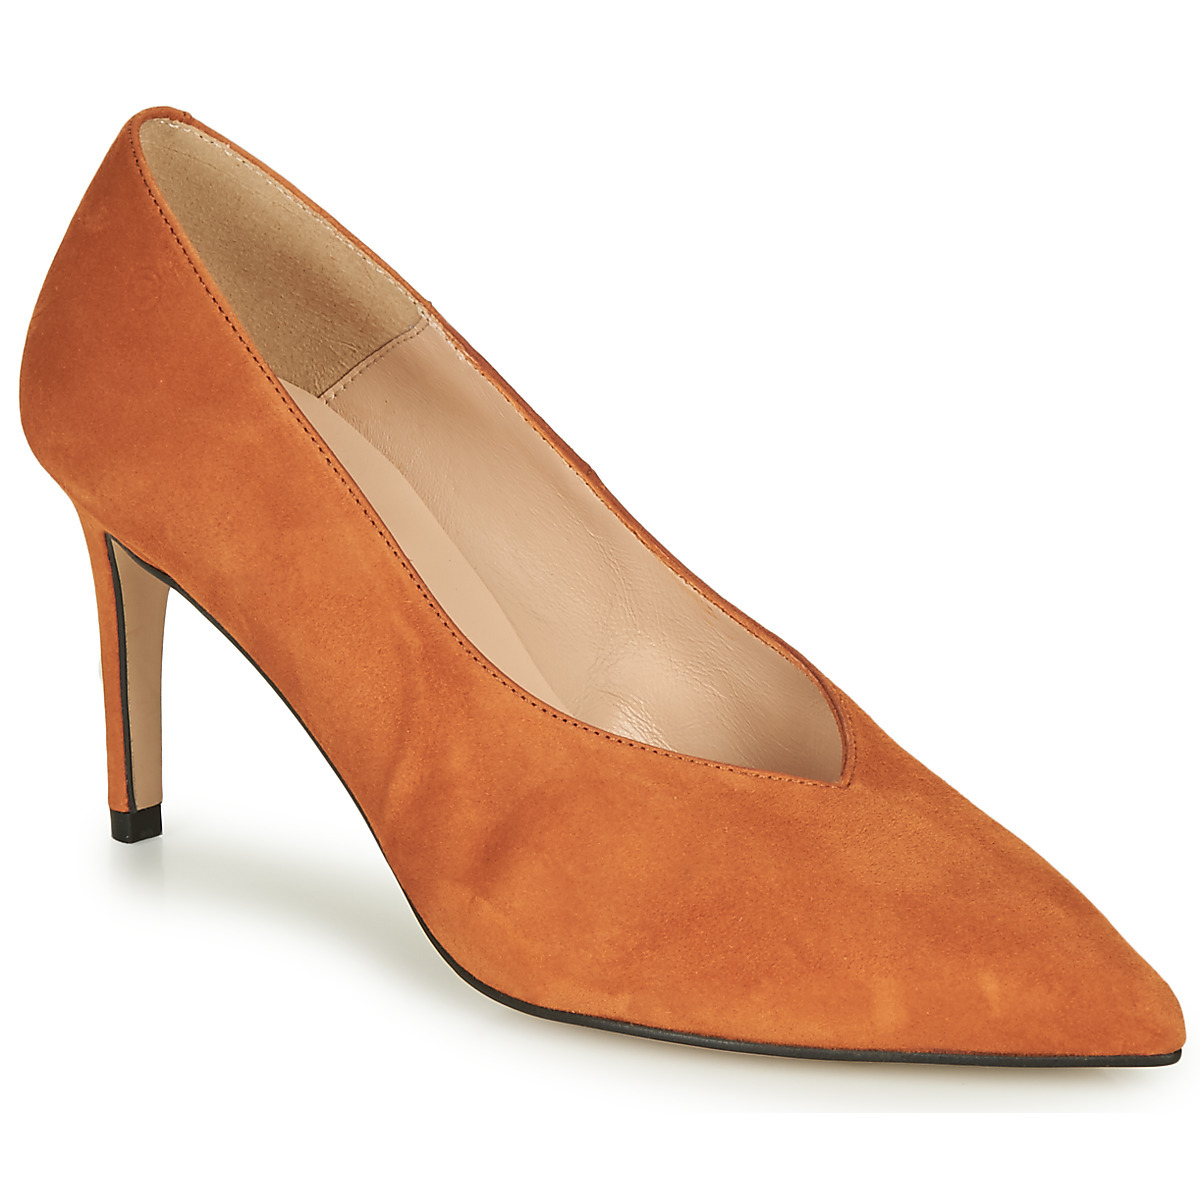 Betty London - Pumps in Brown - Spartoo - Woman GOOFASH